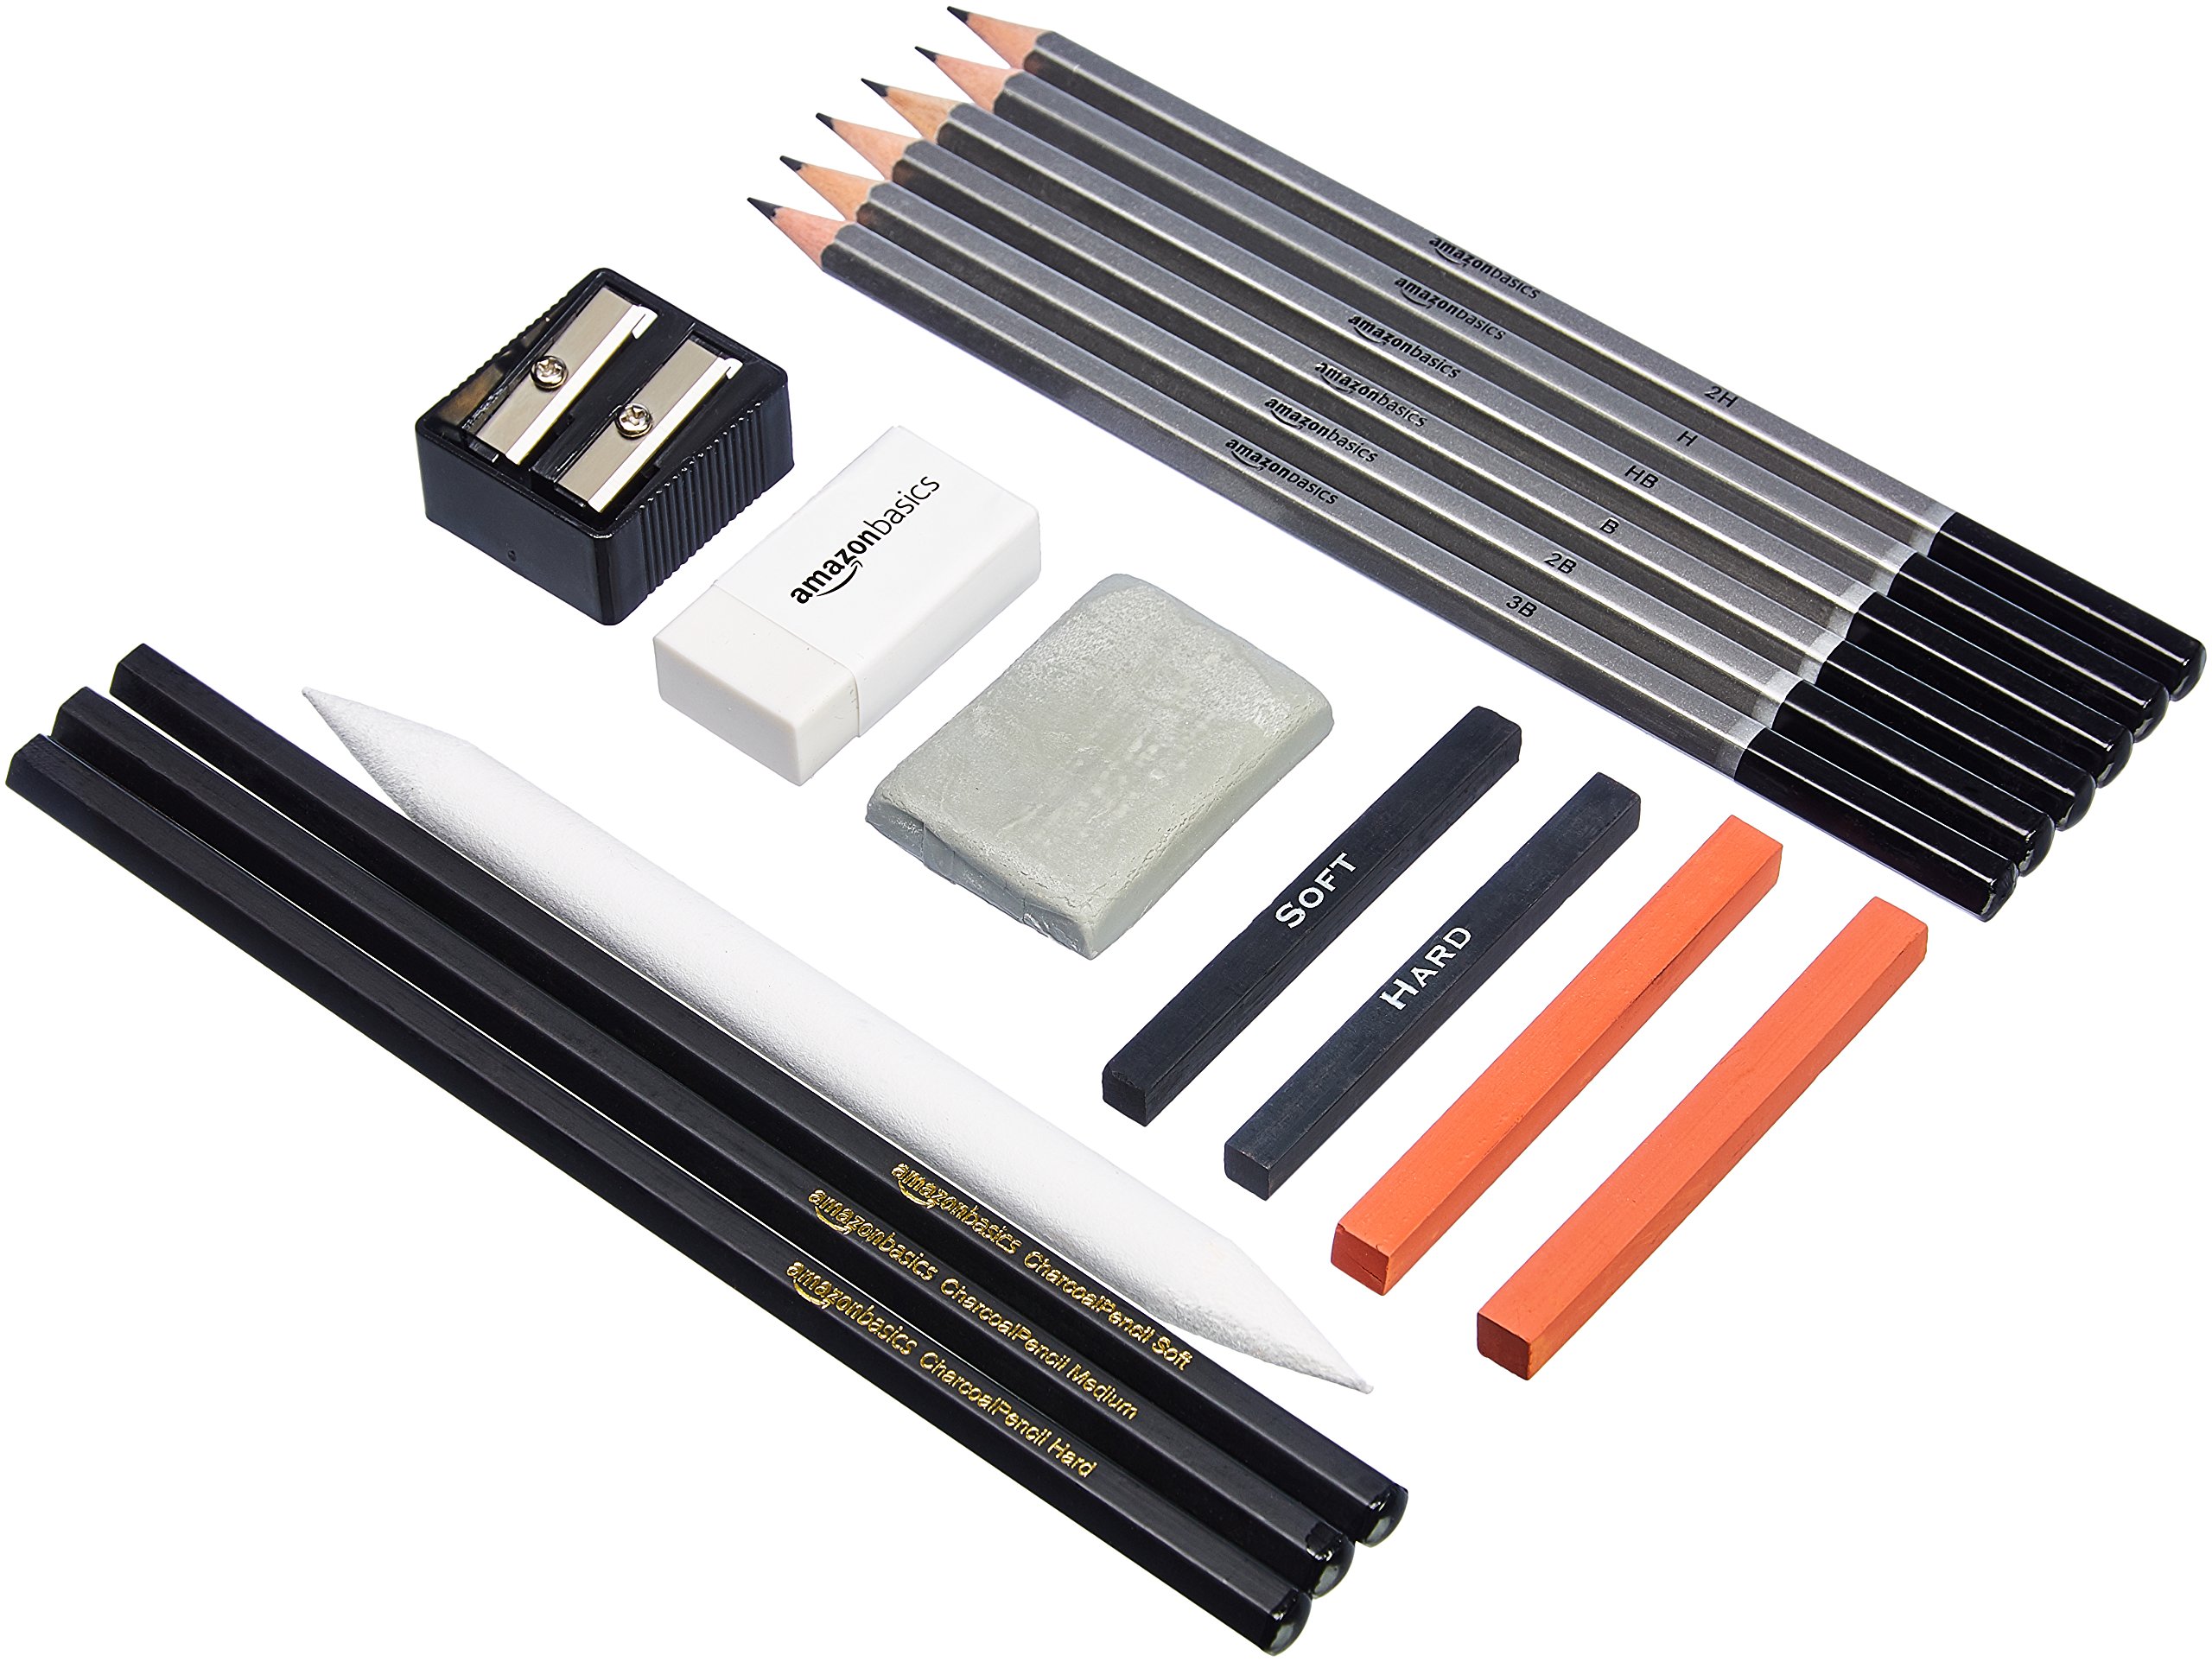 17-Piece Amazon Basics Sketch and Drawing Art Pencil Kit $4.67 + Free Shipping w/ Prime or on $25+